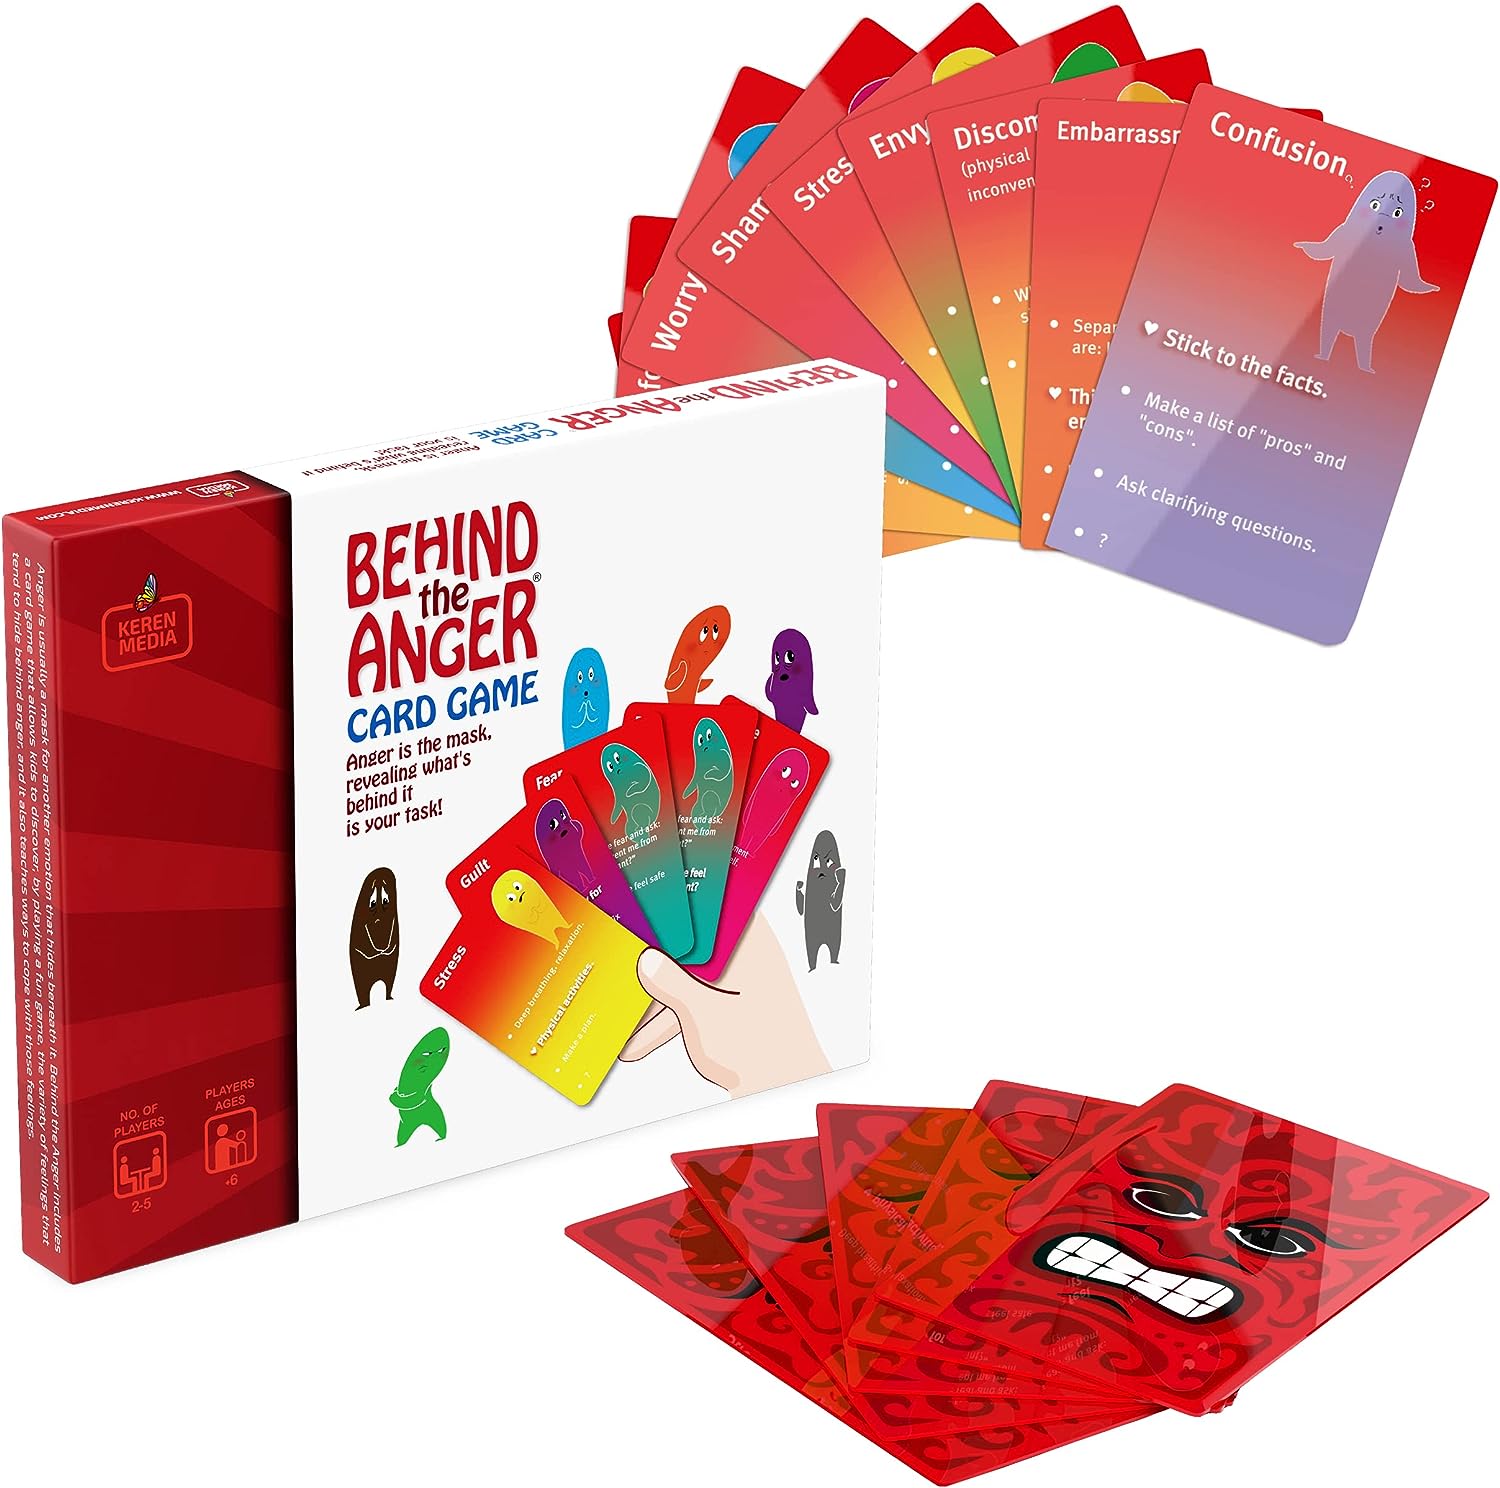 Behind The Anger Card Game for Families, Therapy Games for Kids - Anger Management Toys for Kids - Card Game for Teens - Develop Social Emotional Coping Skills - Anger Control and Counseling Tool